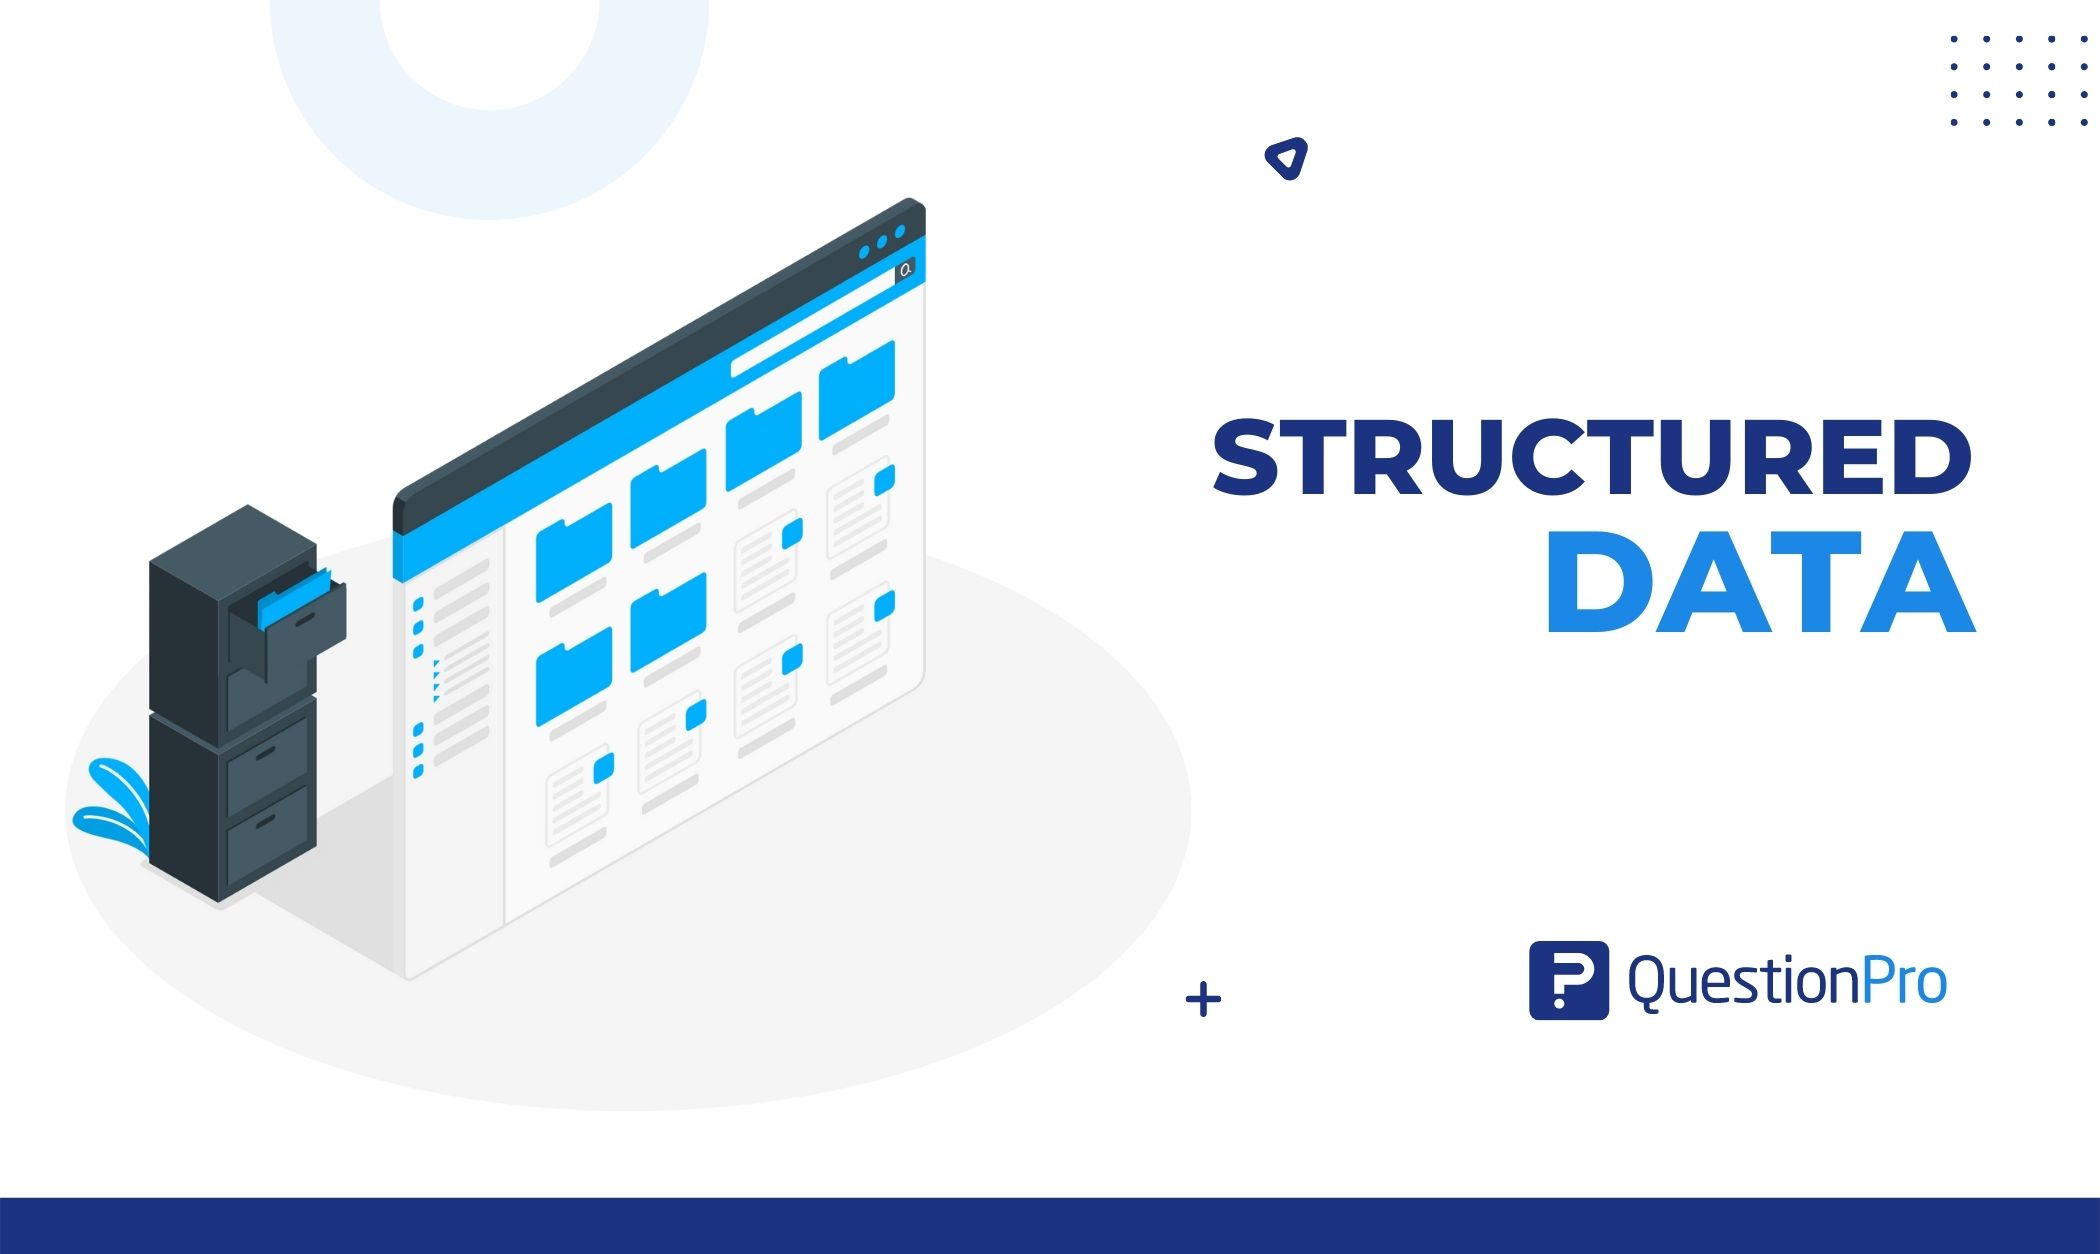 Structured data is well ordered and formatted so that it can be easily searched in database systems. Learn more about it here.